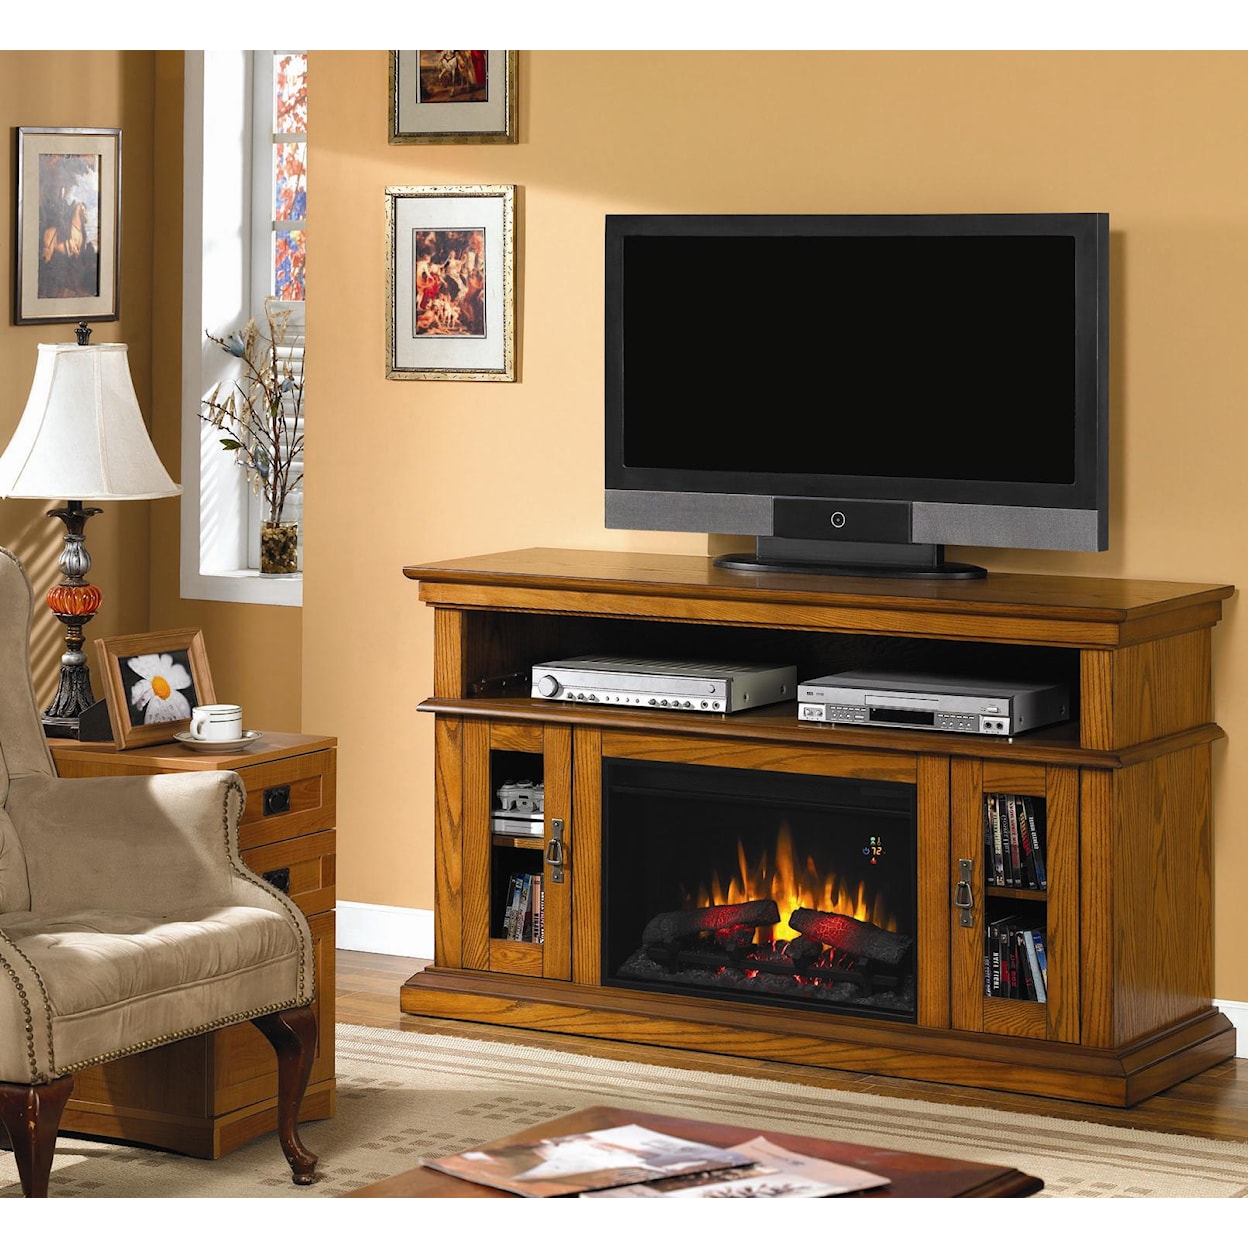 ClassicFlame Brookfield Brookfield Electric Fireplace